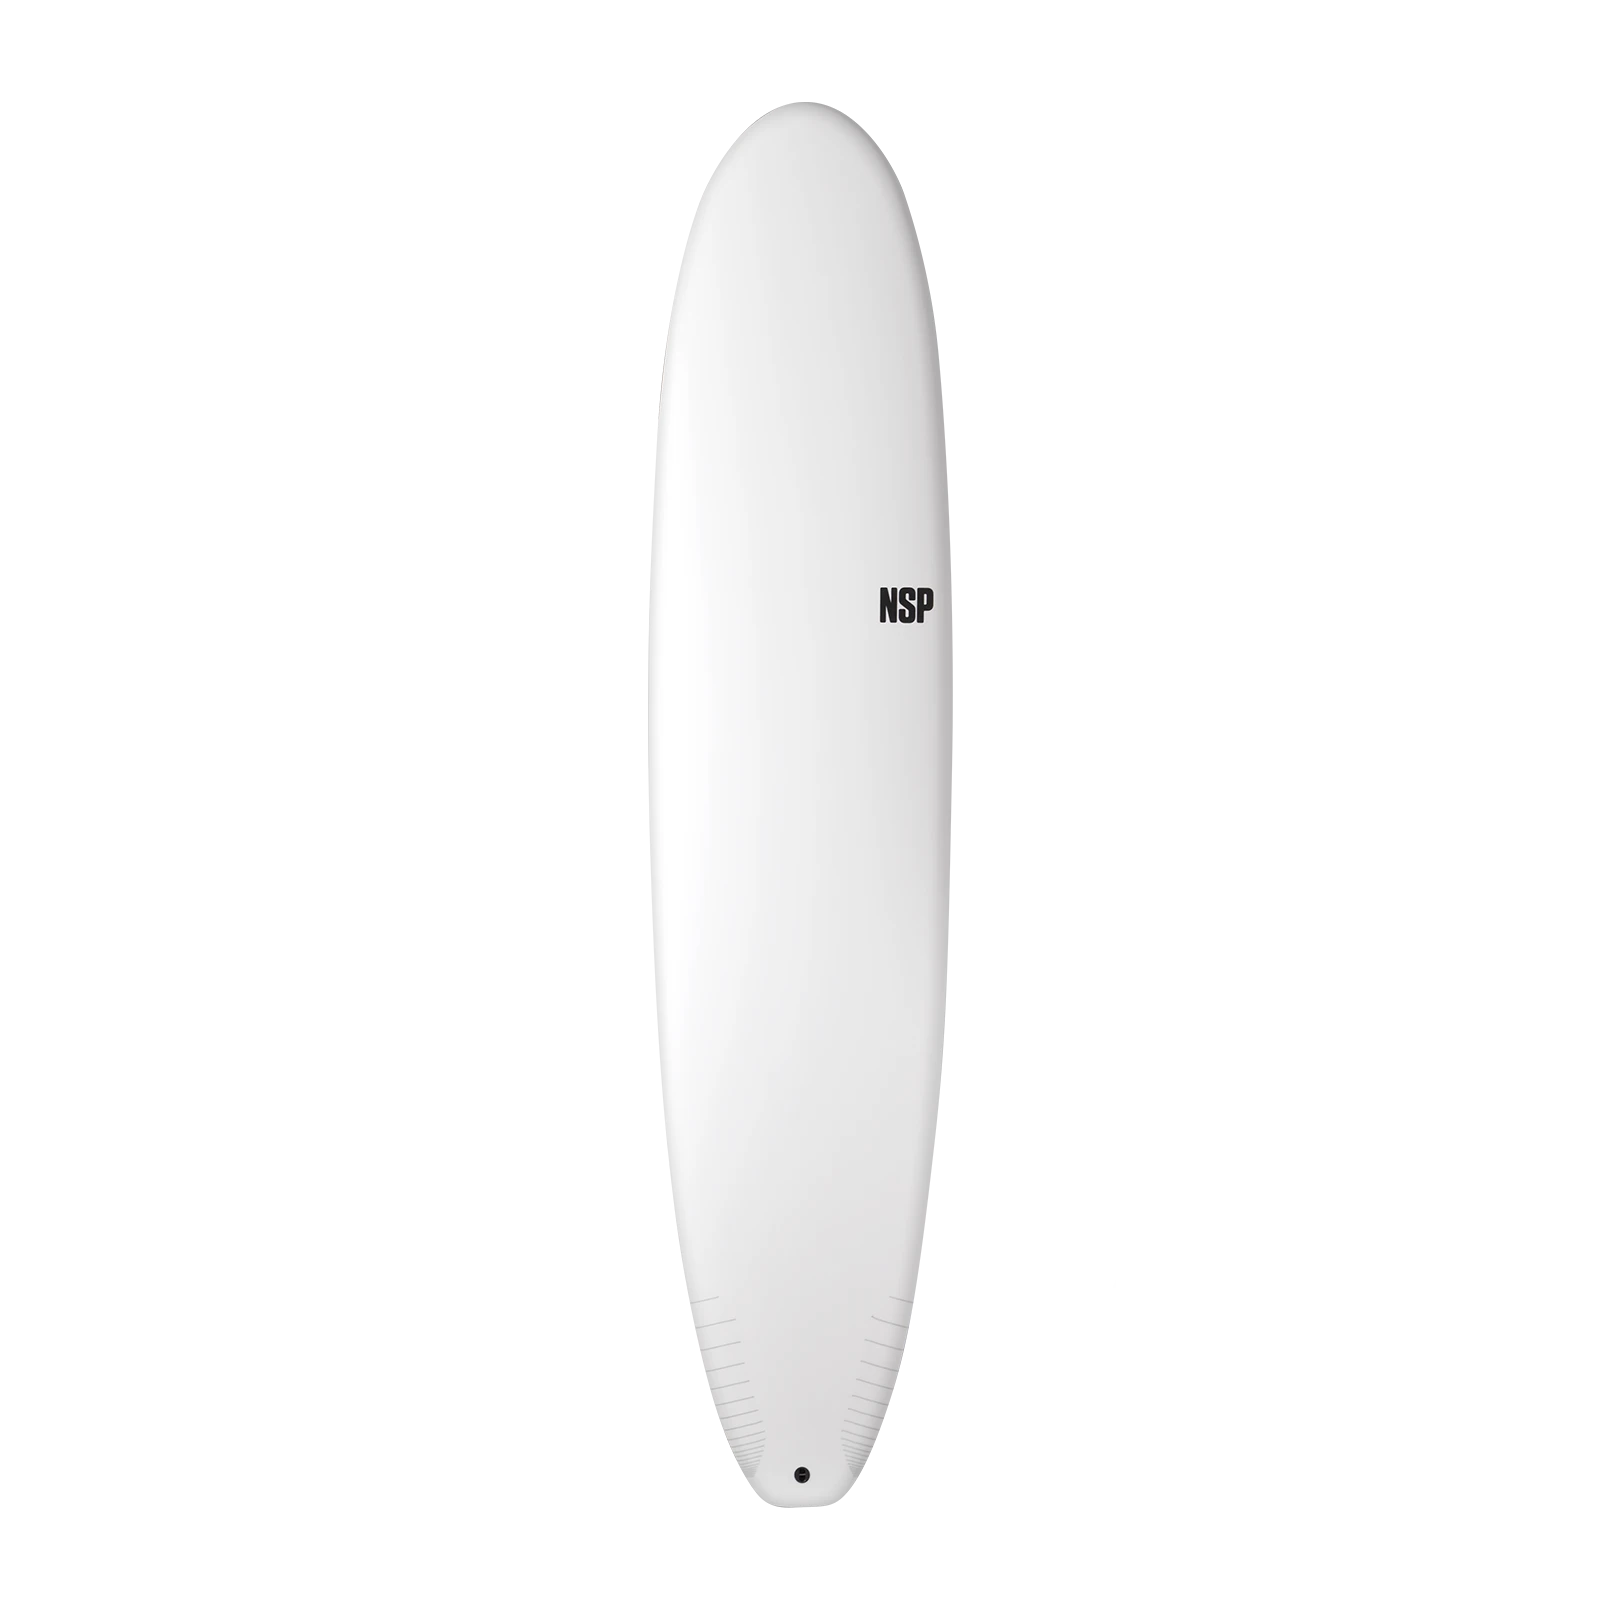 Longboard Surfboards NSP Protech White tint